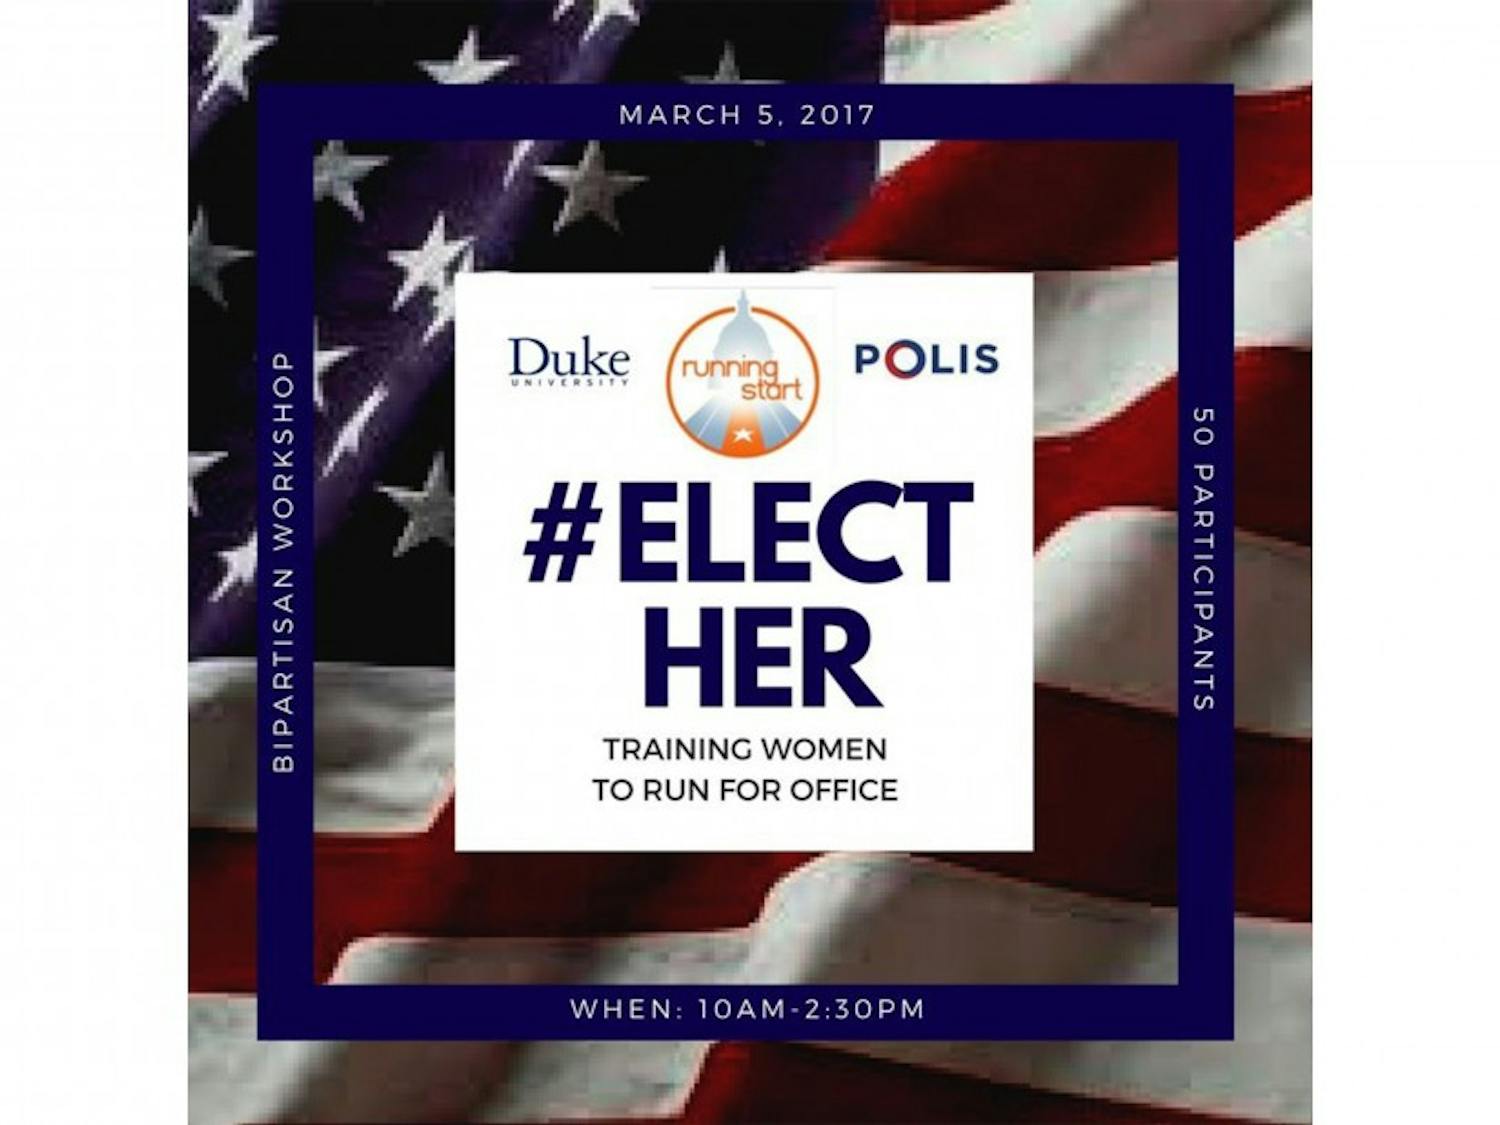 The&nbsp;Elect Her initiative encourages women to be more politically active both on campus and after they graduate.&nbsp;